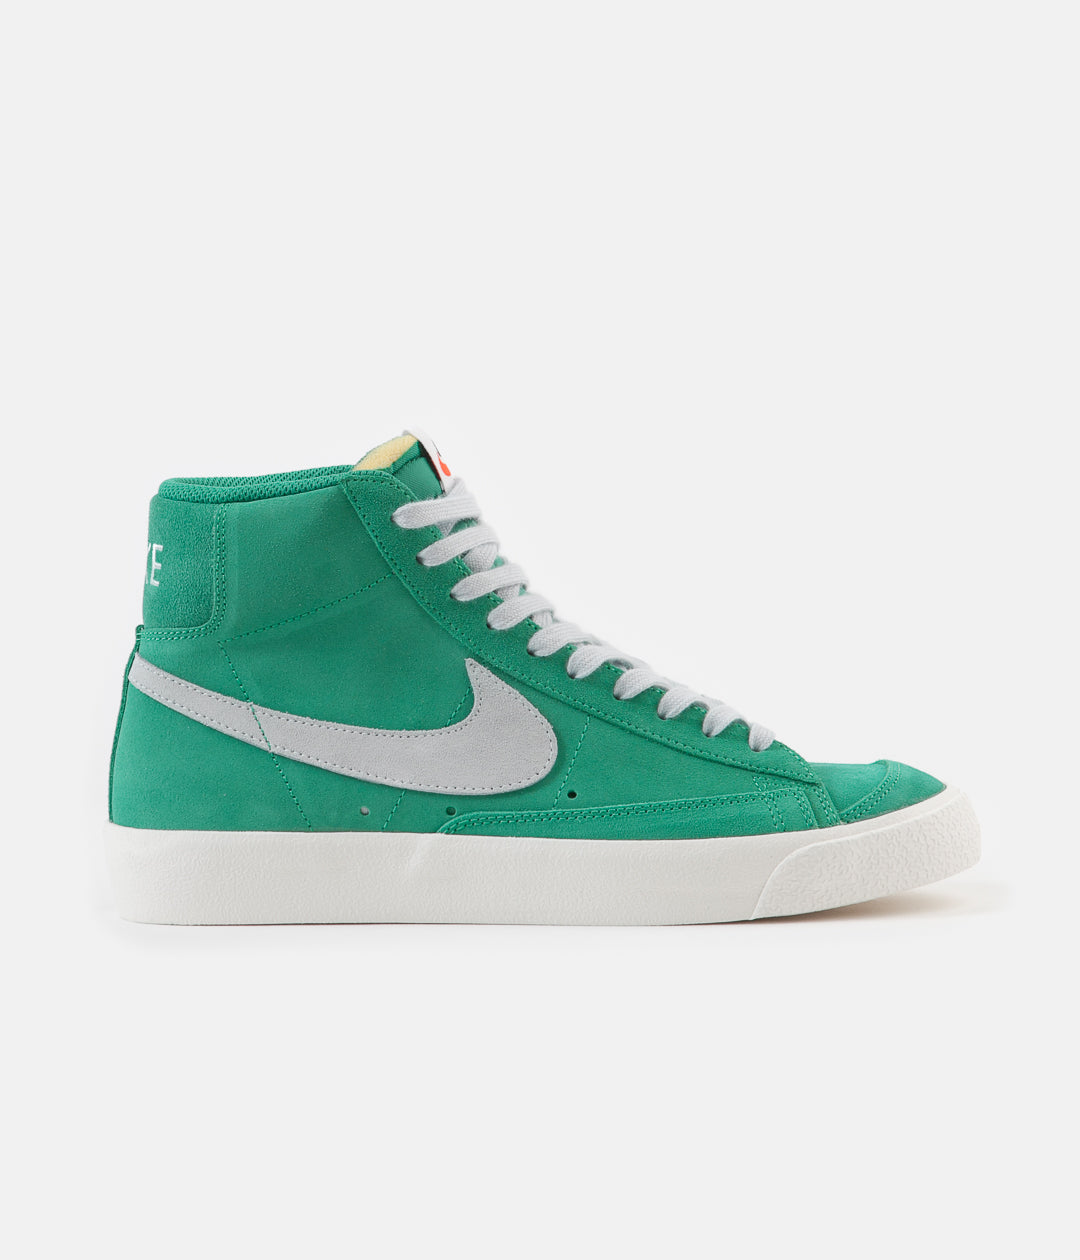 nike green suede shoes